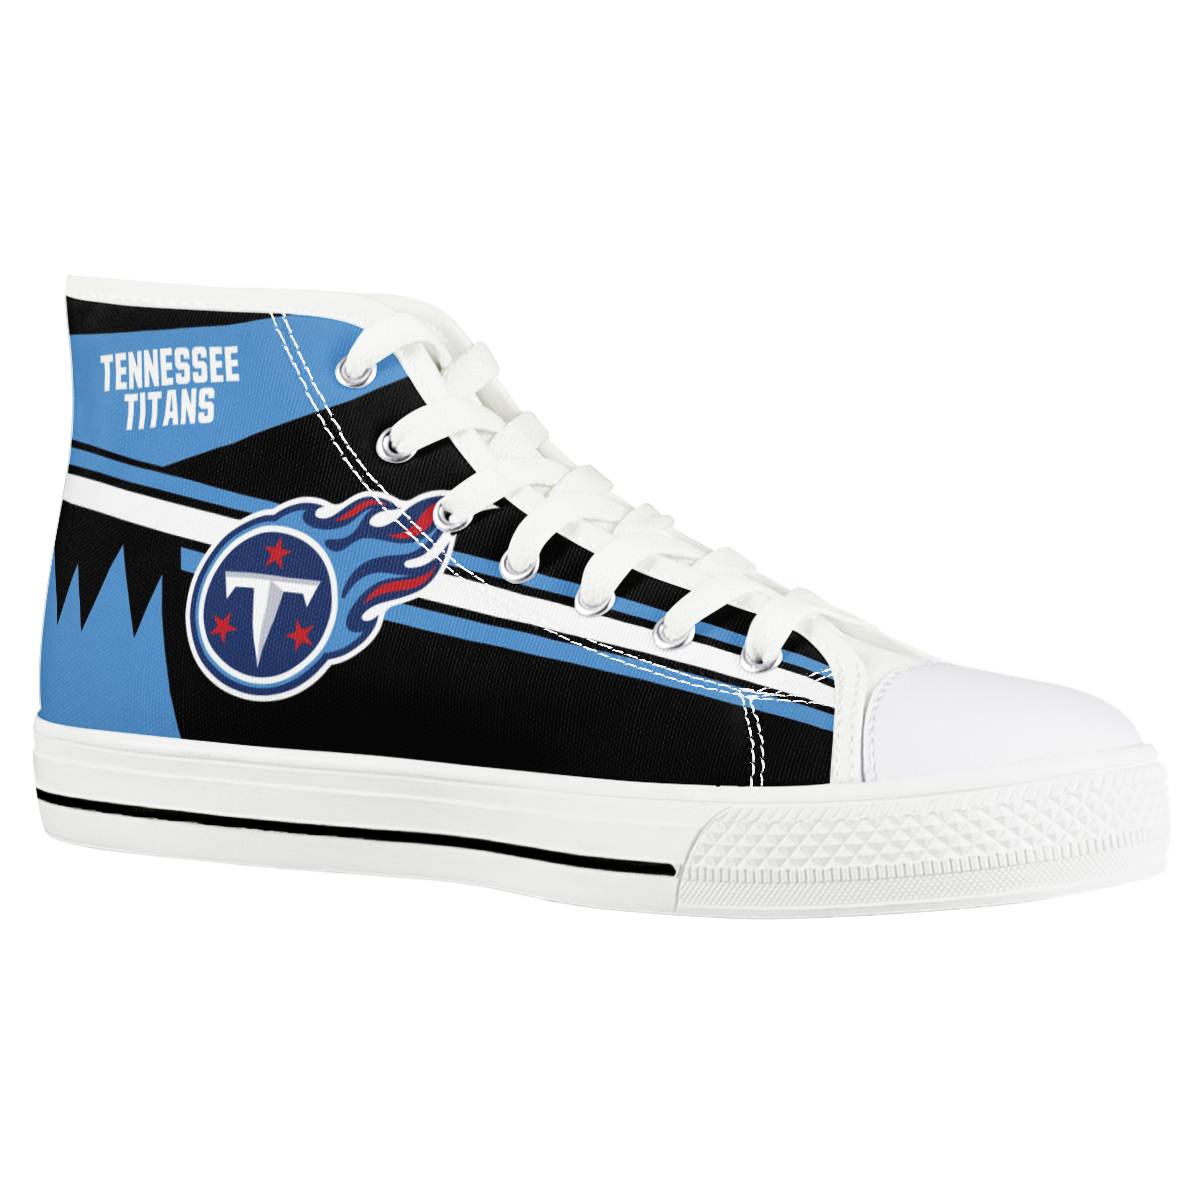 Men's Tennessee Titans High Top Canvas Sneakers 001